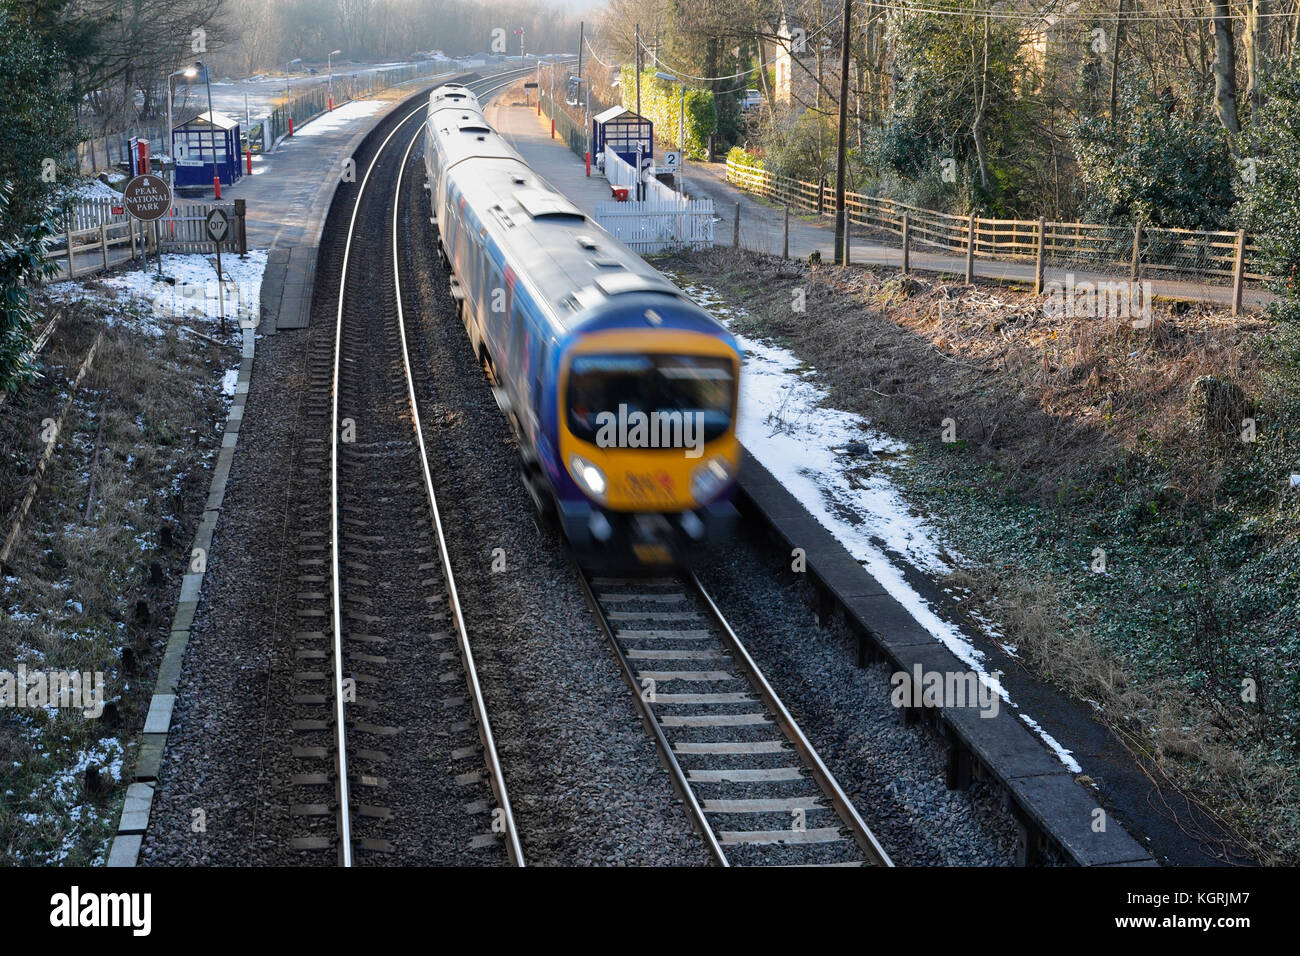 First trans pennine express train passing at speed through Grindleford in Derbyshire England UK Hope valley line Stock Photo